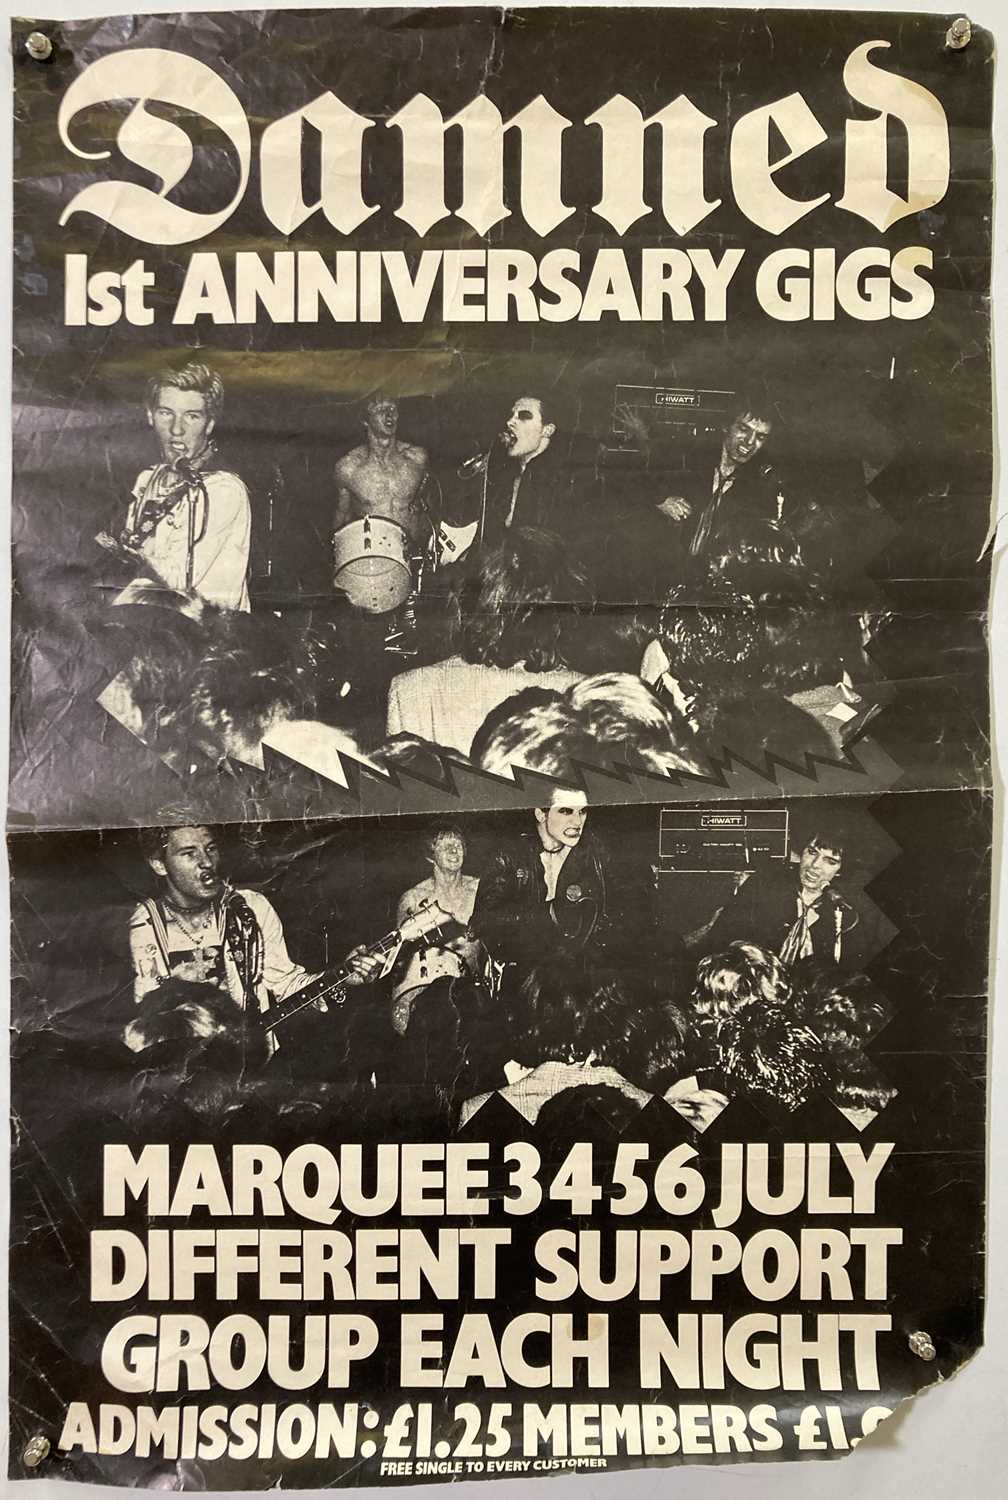 Lot 217 - THE DAMNED - 1ST ANNIVERSARY POSTER.